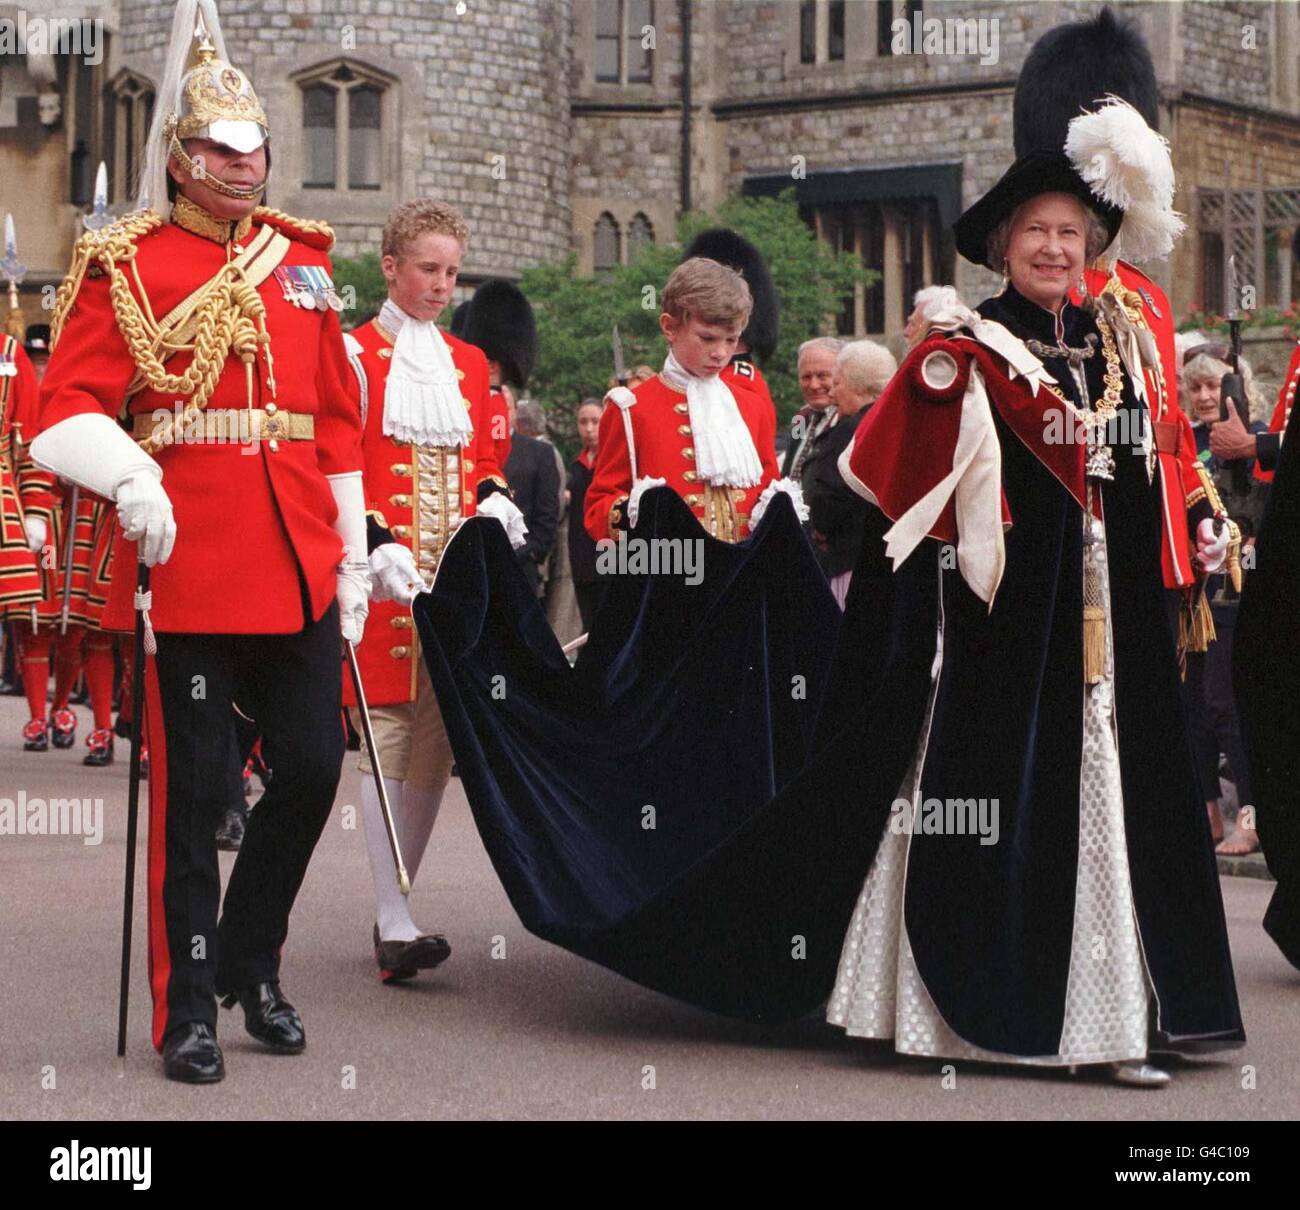 Her Majesty the Queen (right) walks in procession during The Garter ceremony at Windsor Castle, today (Monday). Photo Times/NPA ROTA) Stock Photo